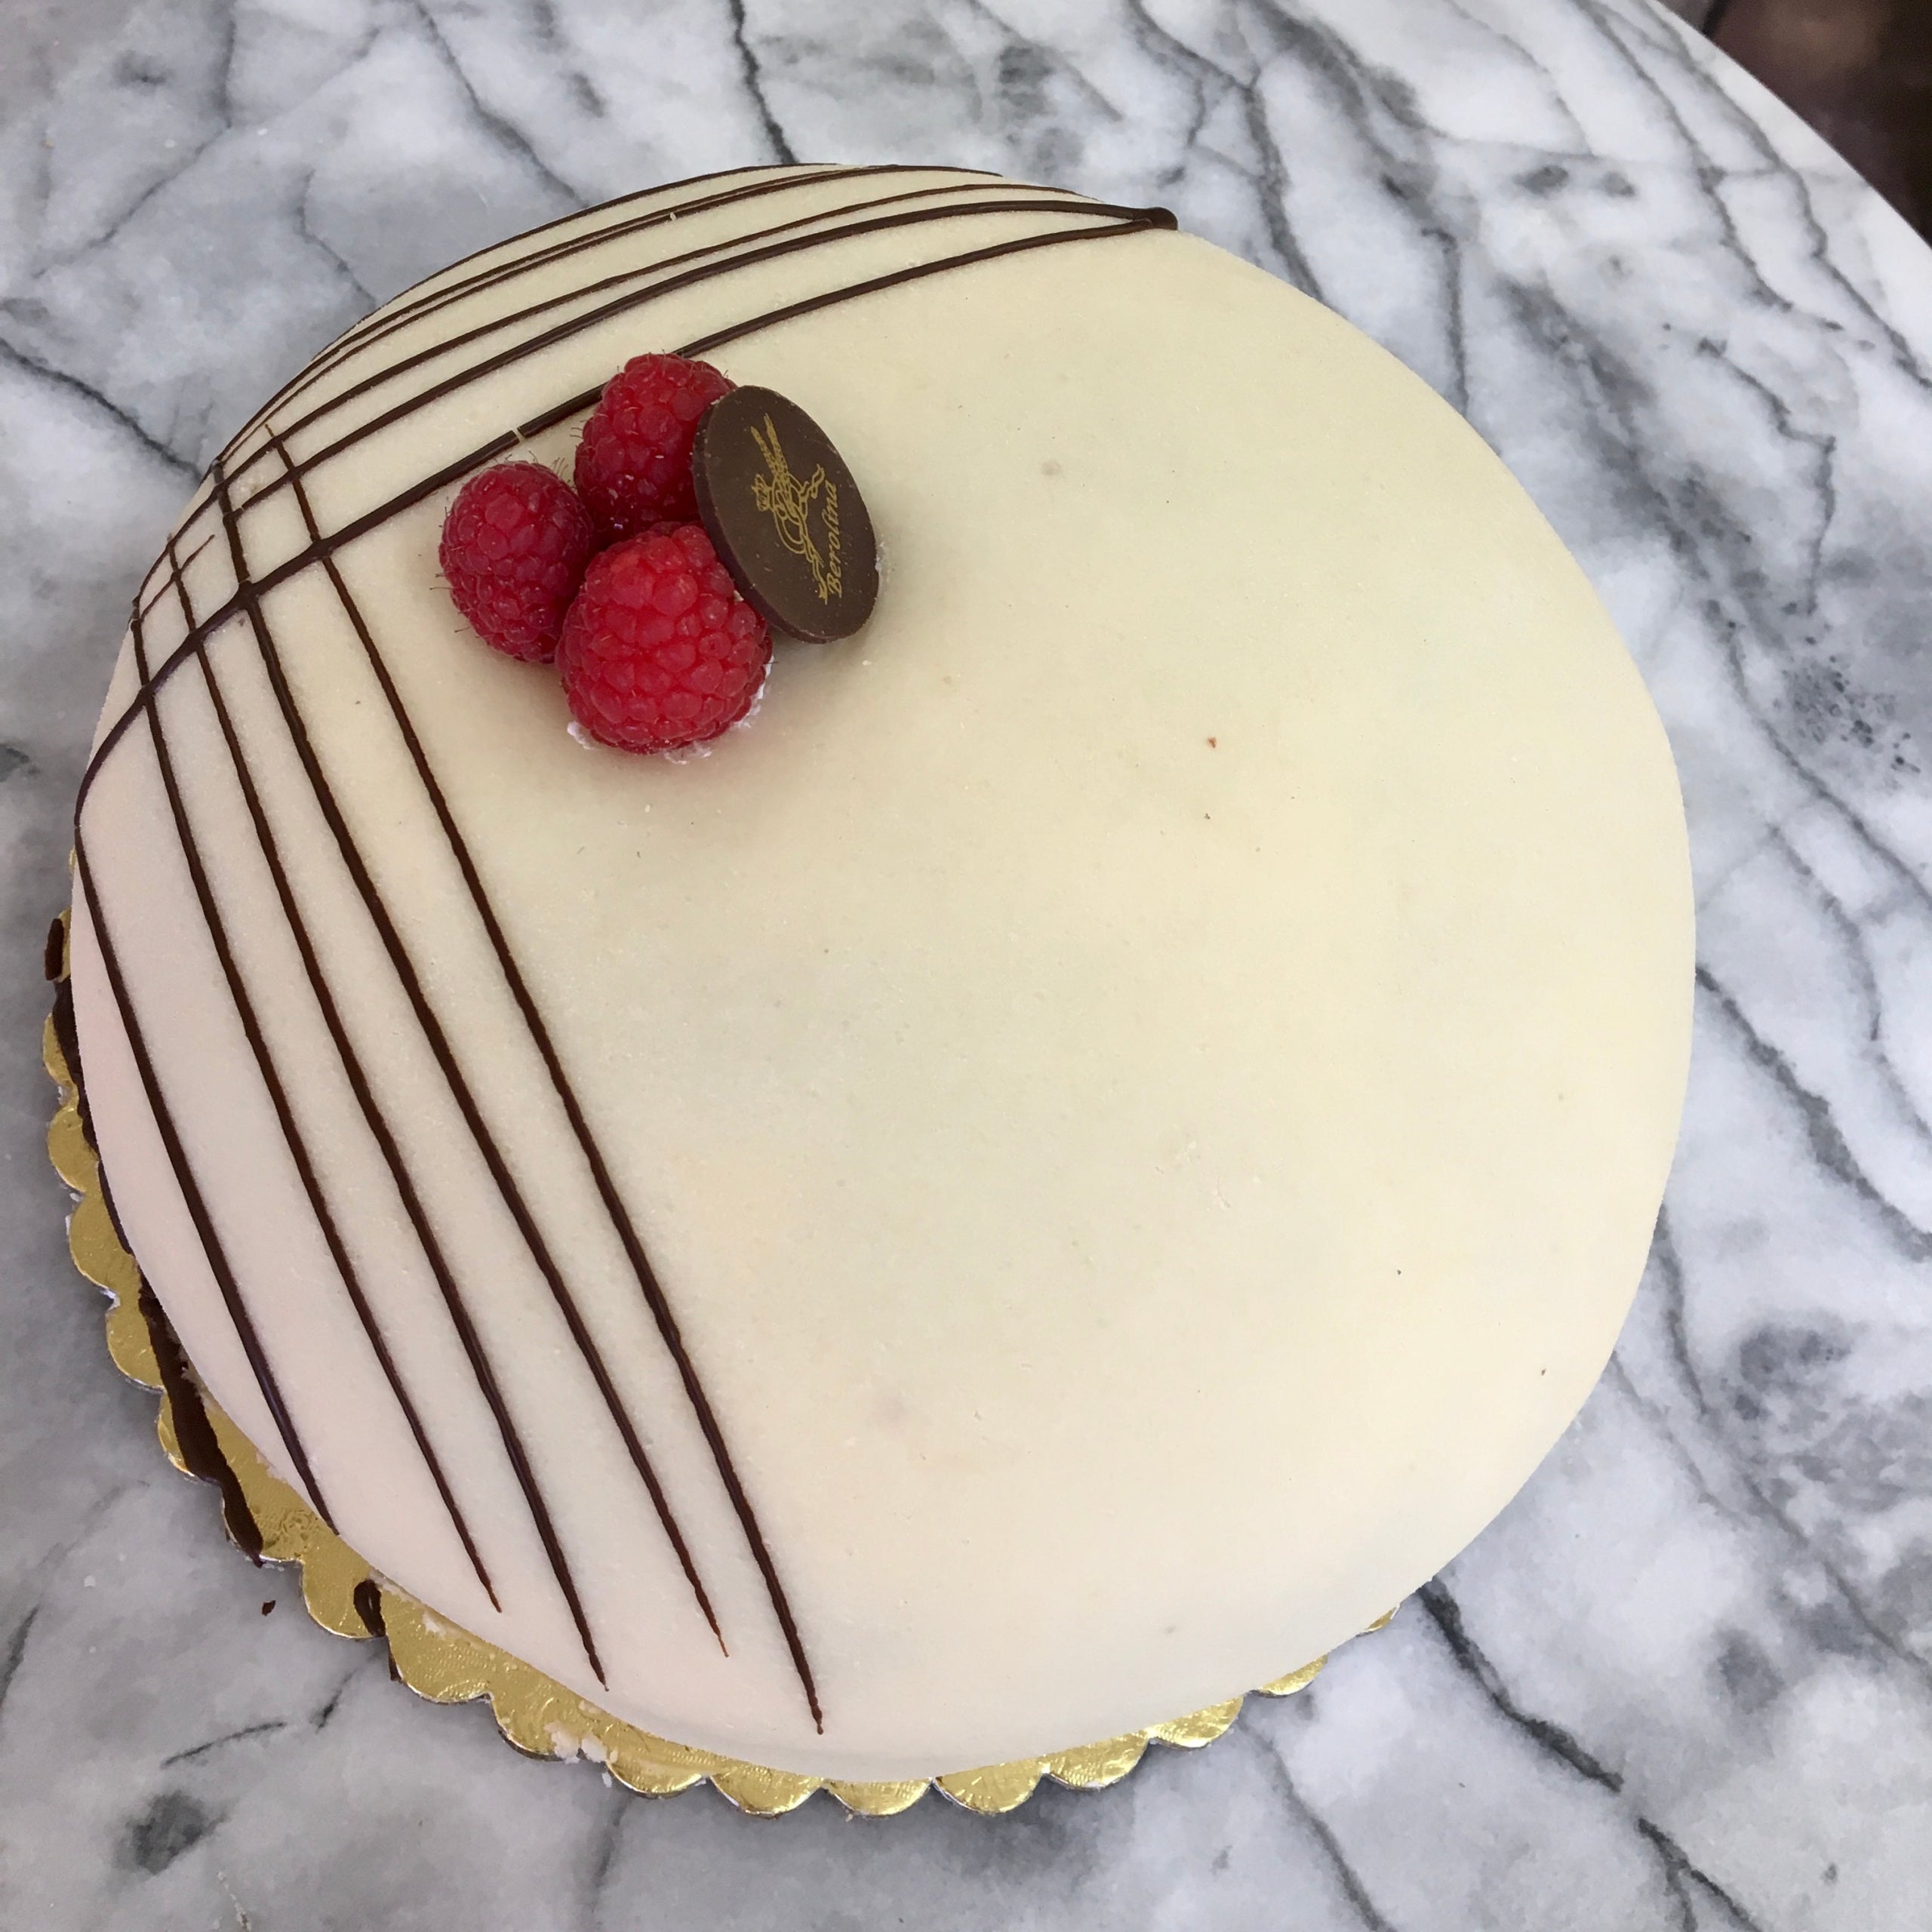 Birthday Cake with Raspberries and Marzipan | Le Creuset Recipes